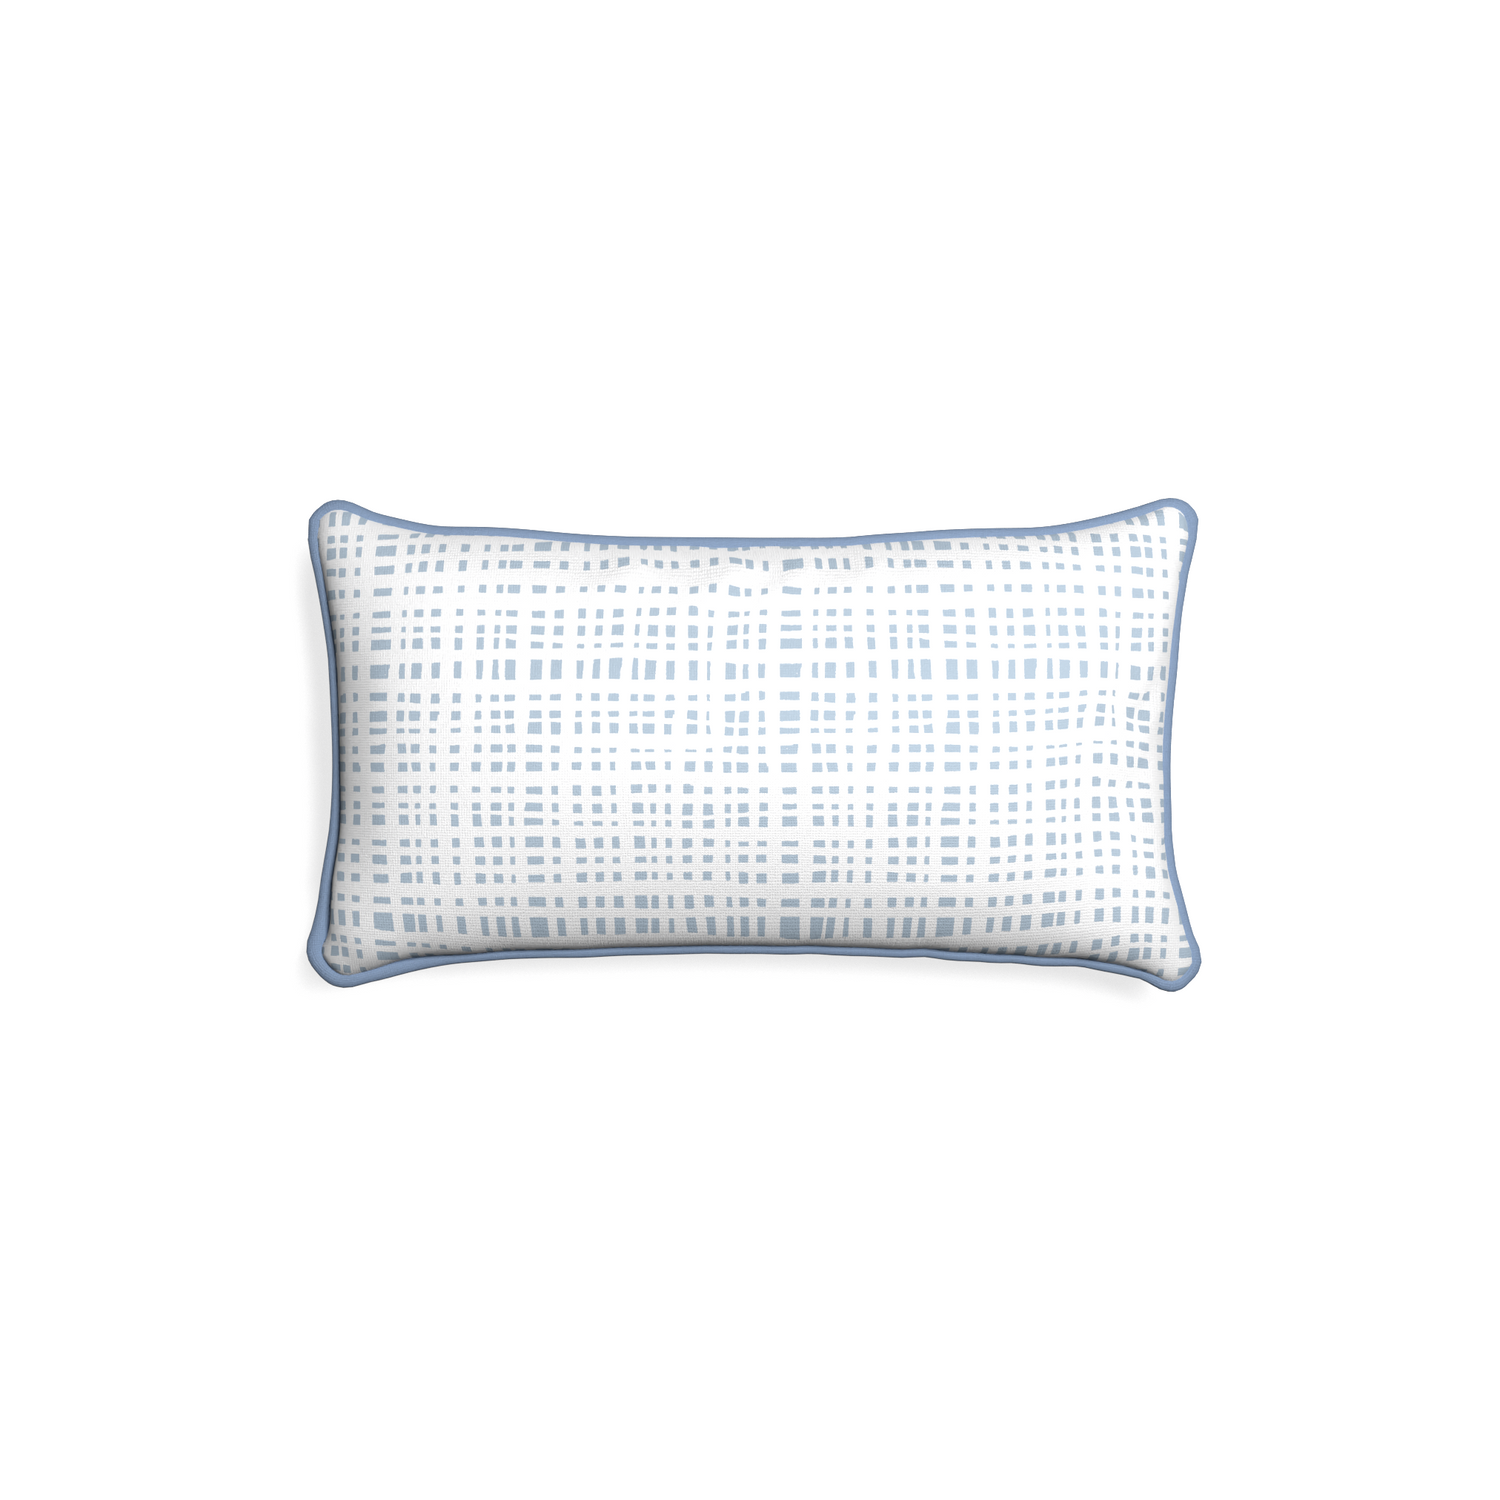 Petite-lumbar ginger sky custom plaid sky bluepillow with sky piping on white background